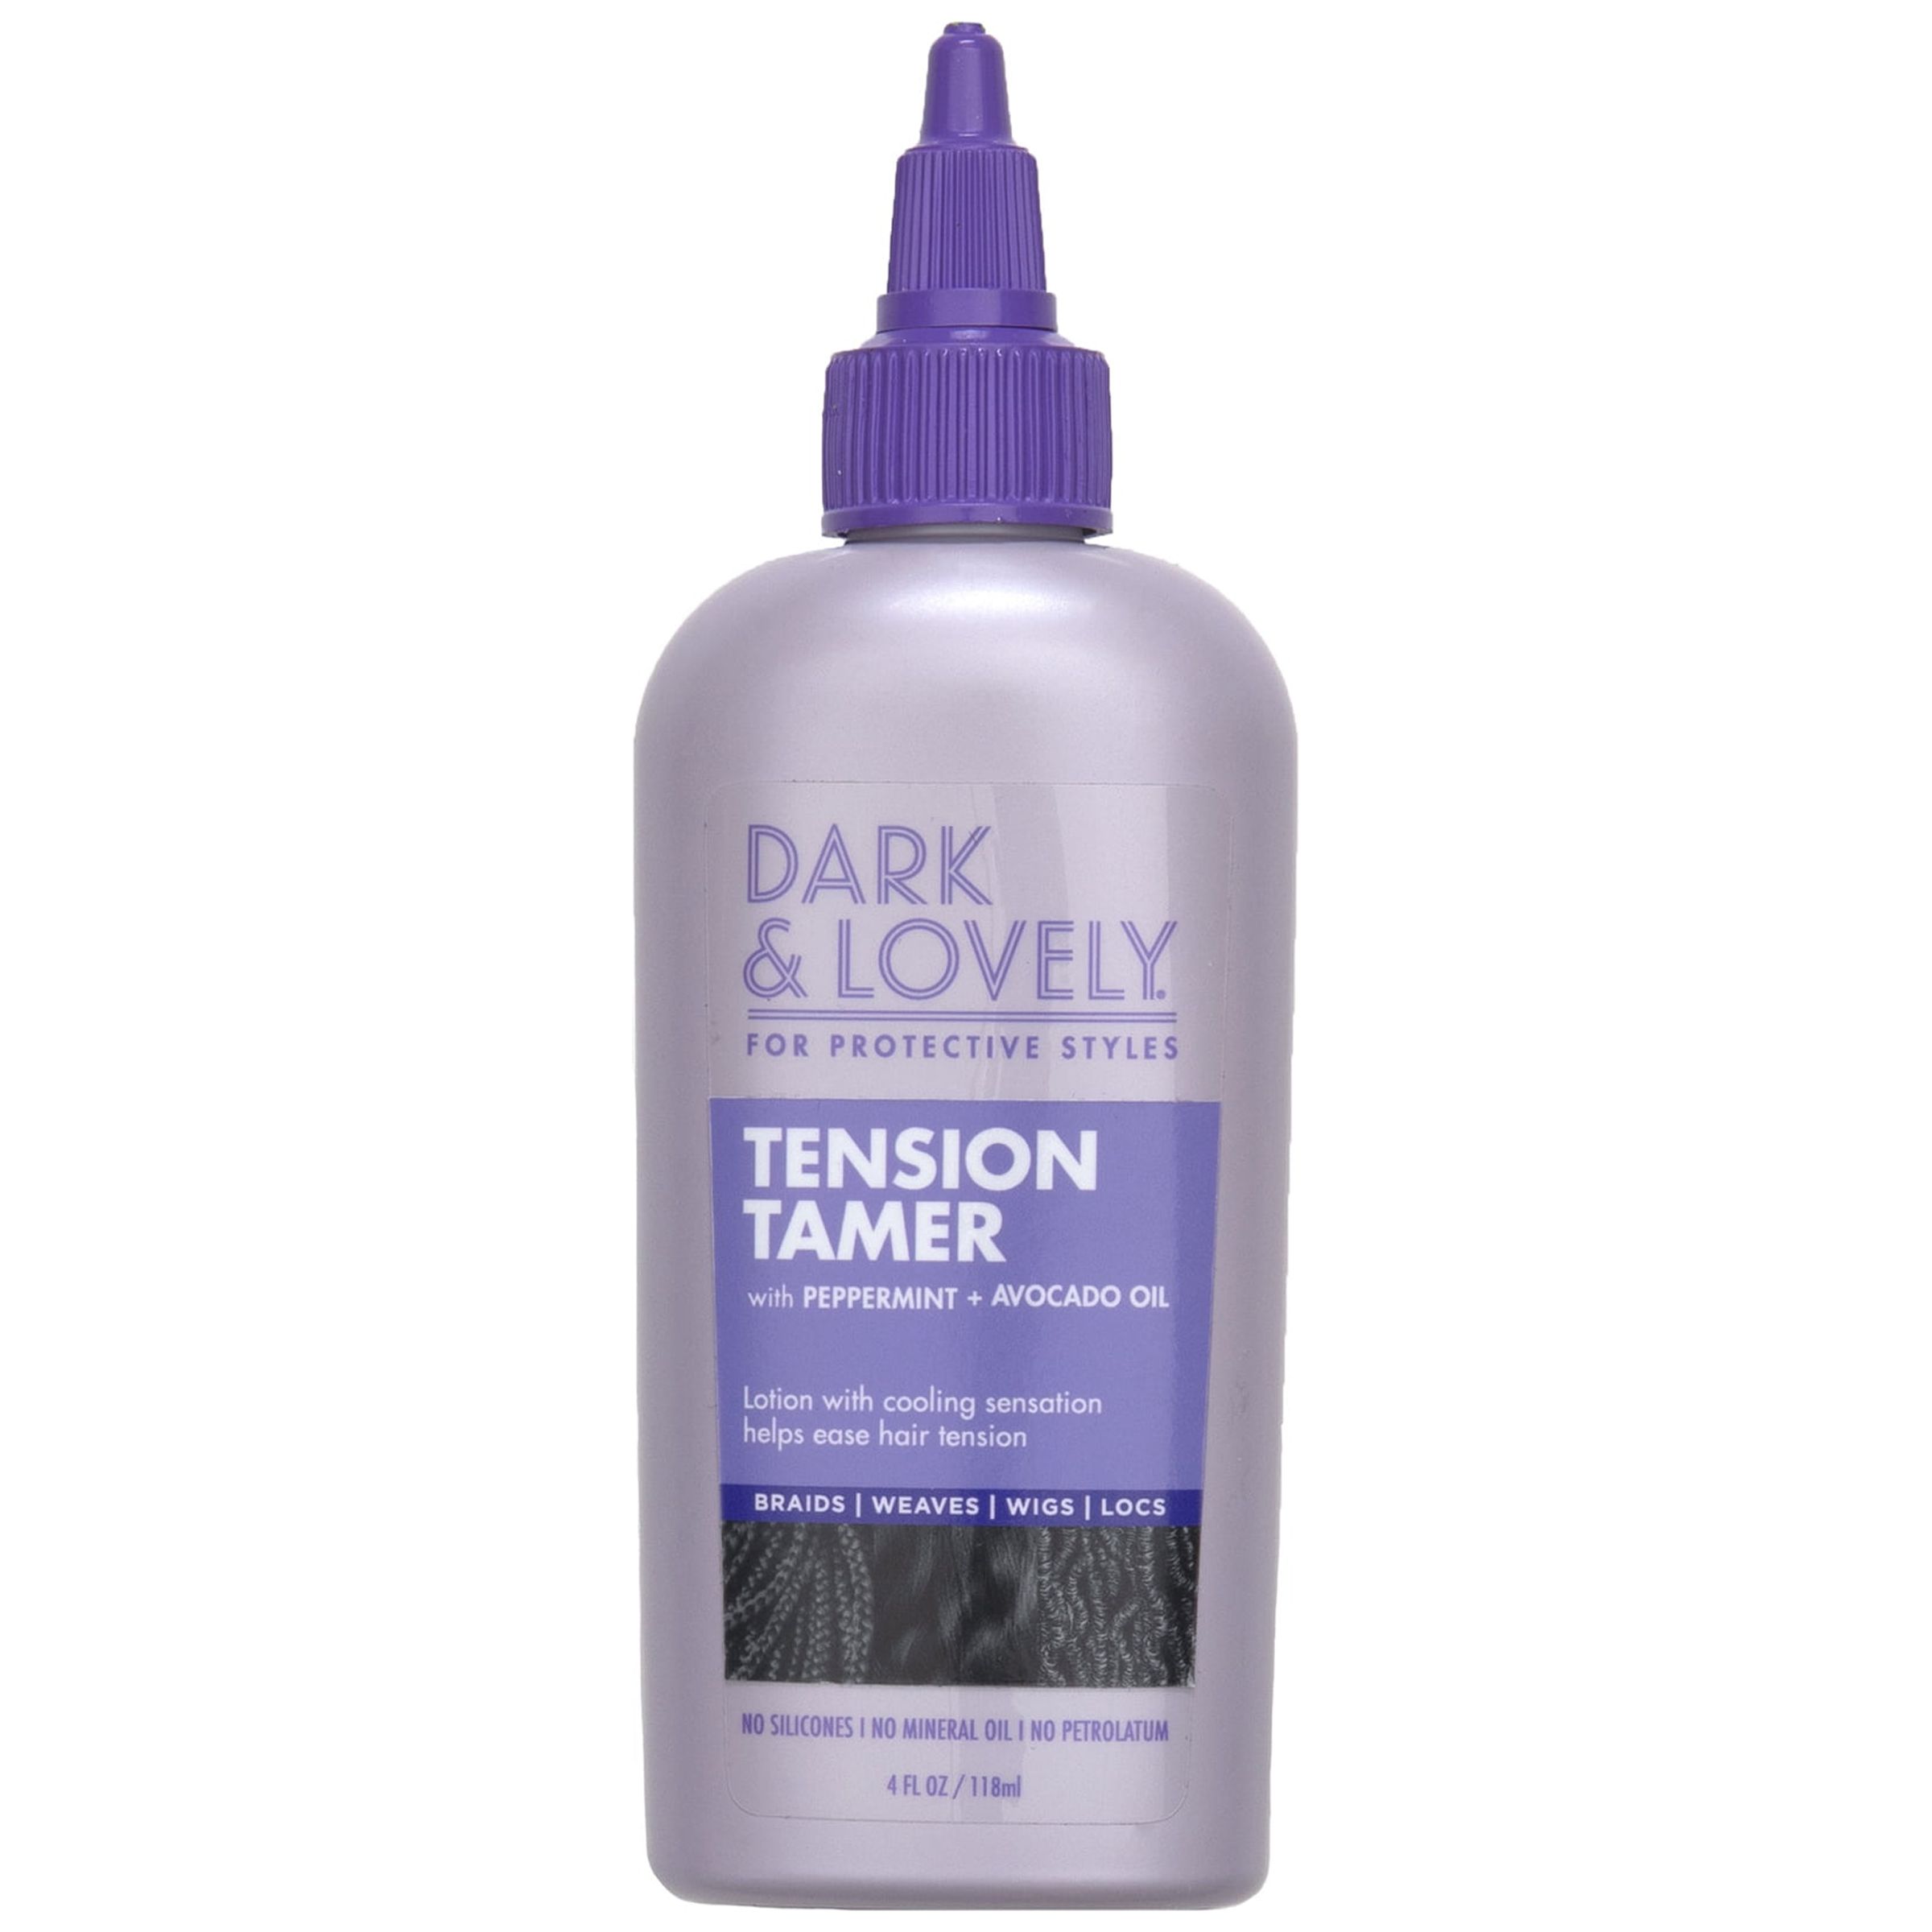 Dark and Lovely Tension Tamer For Protective Styles, 4 fl oz - image 1 of 8